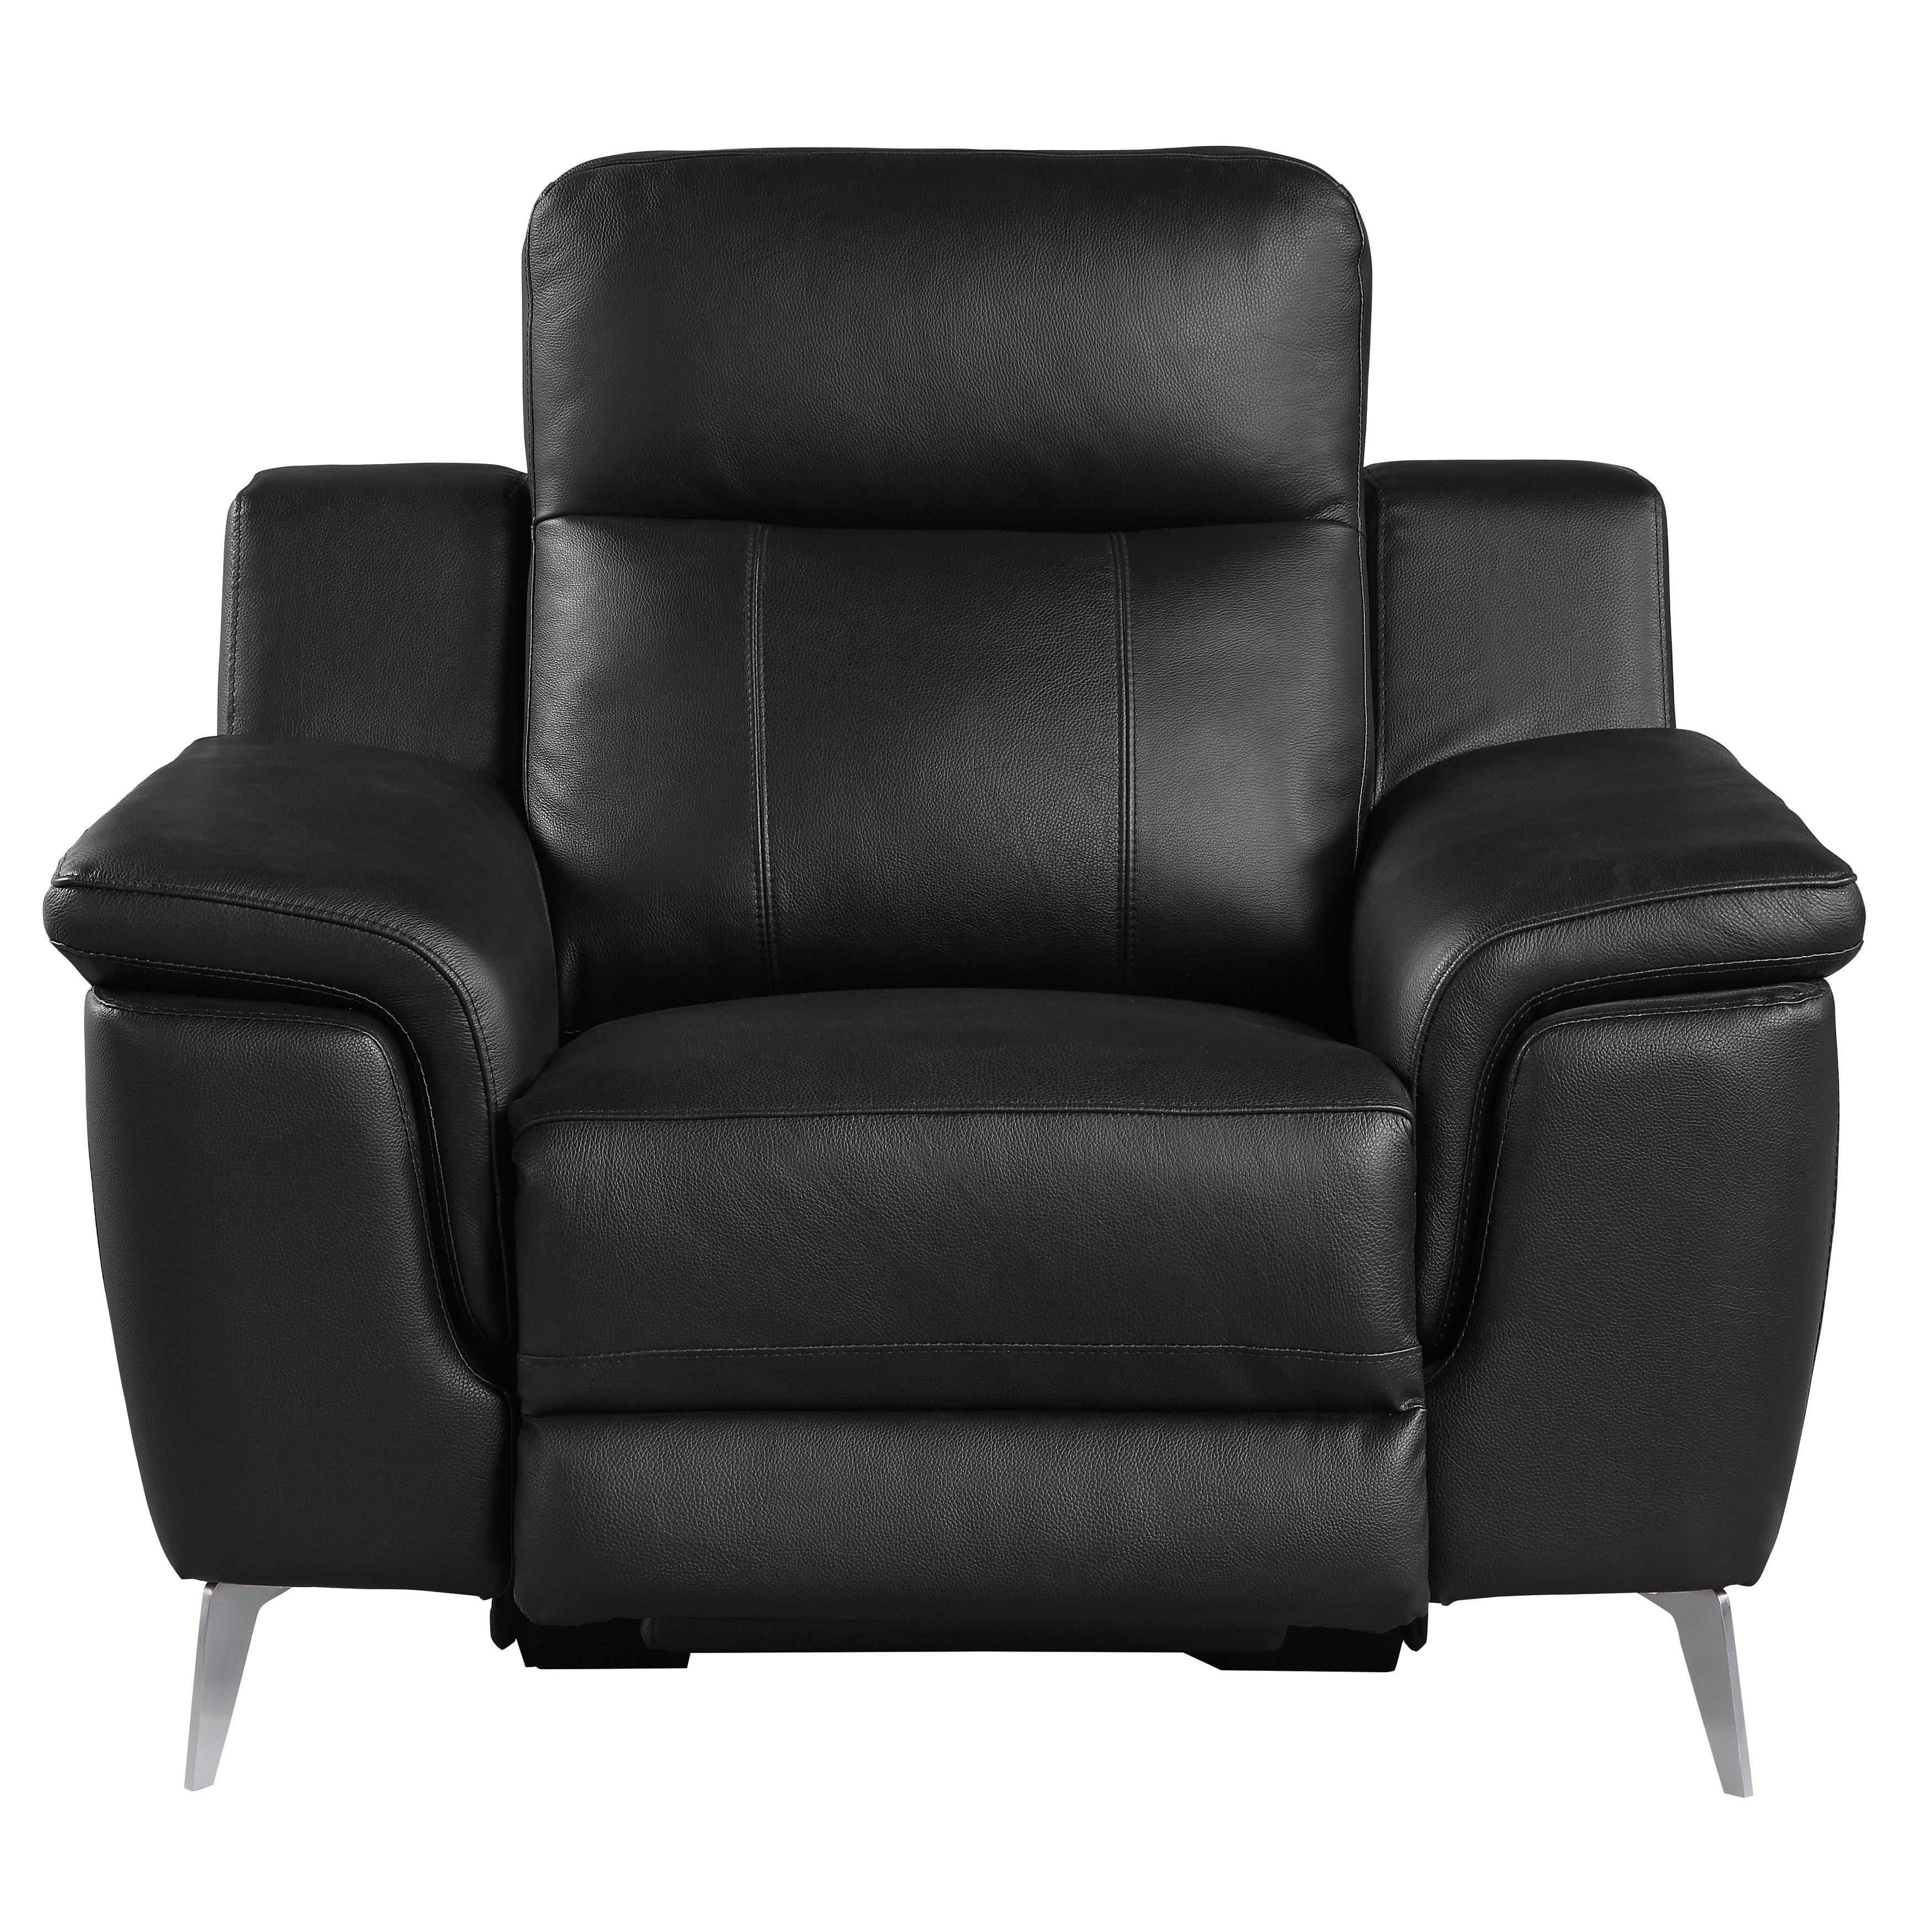 Modern Power Reclining Chair 9360BLK-1PW Antonio 9360BLK-1PW in Black Leather